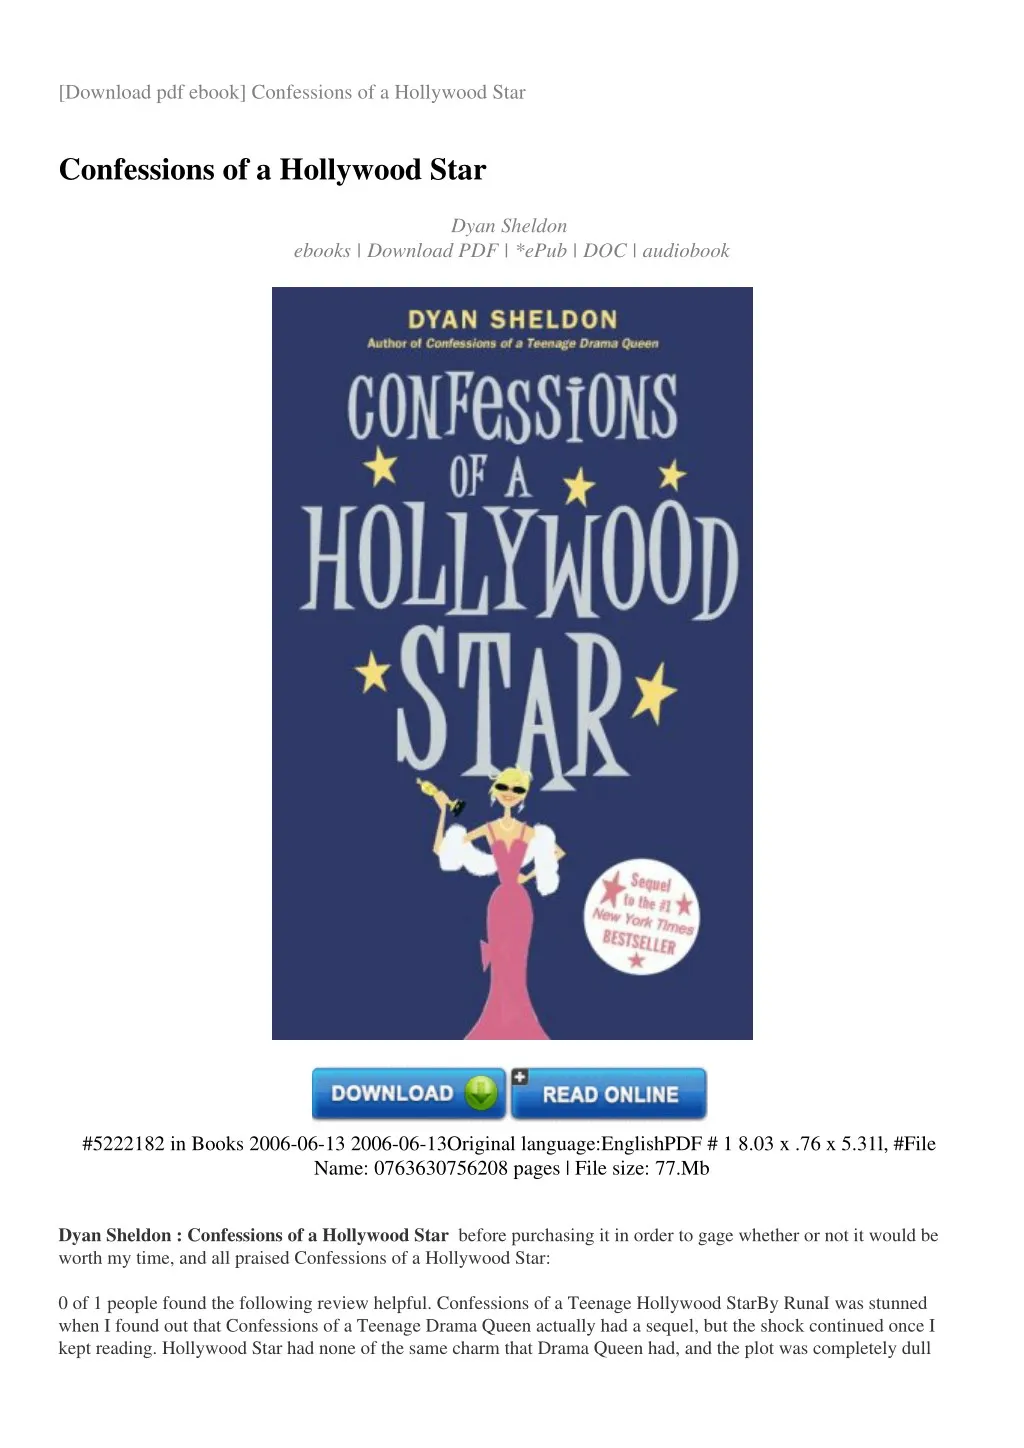 download pdf ebook confessions of a hollywood star